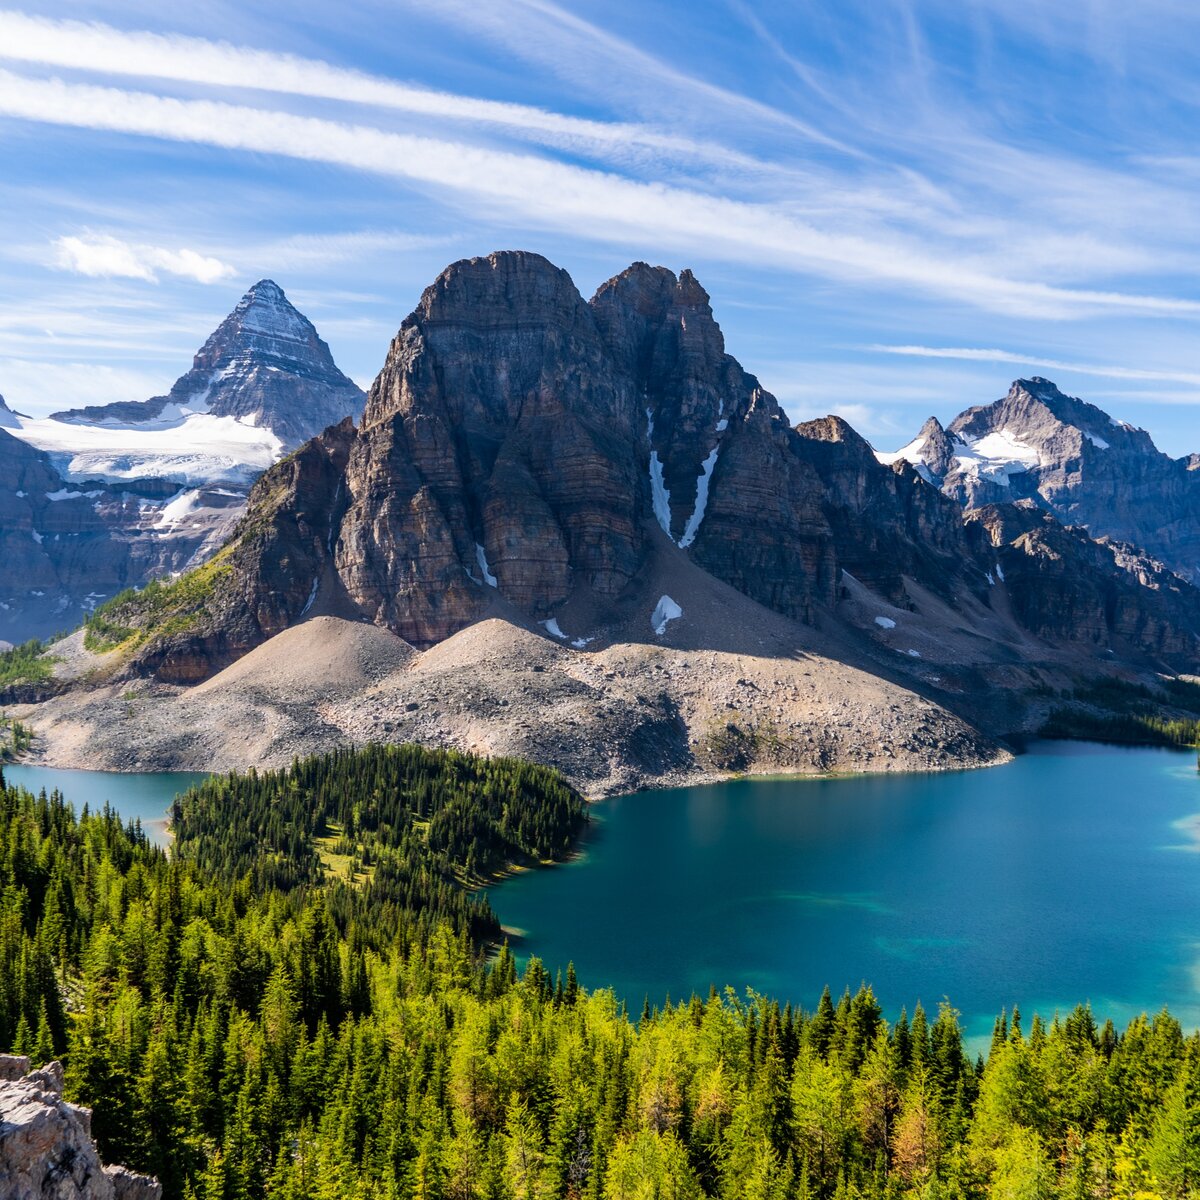 Best of Western Canada - Blue lake with mountain scenery and green forests